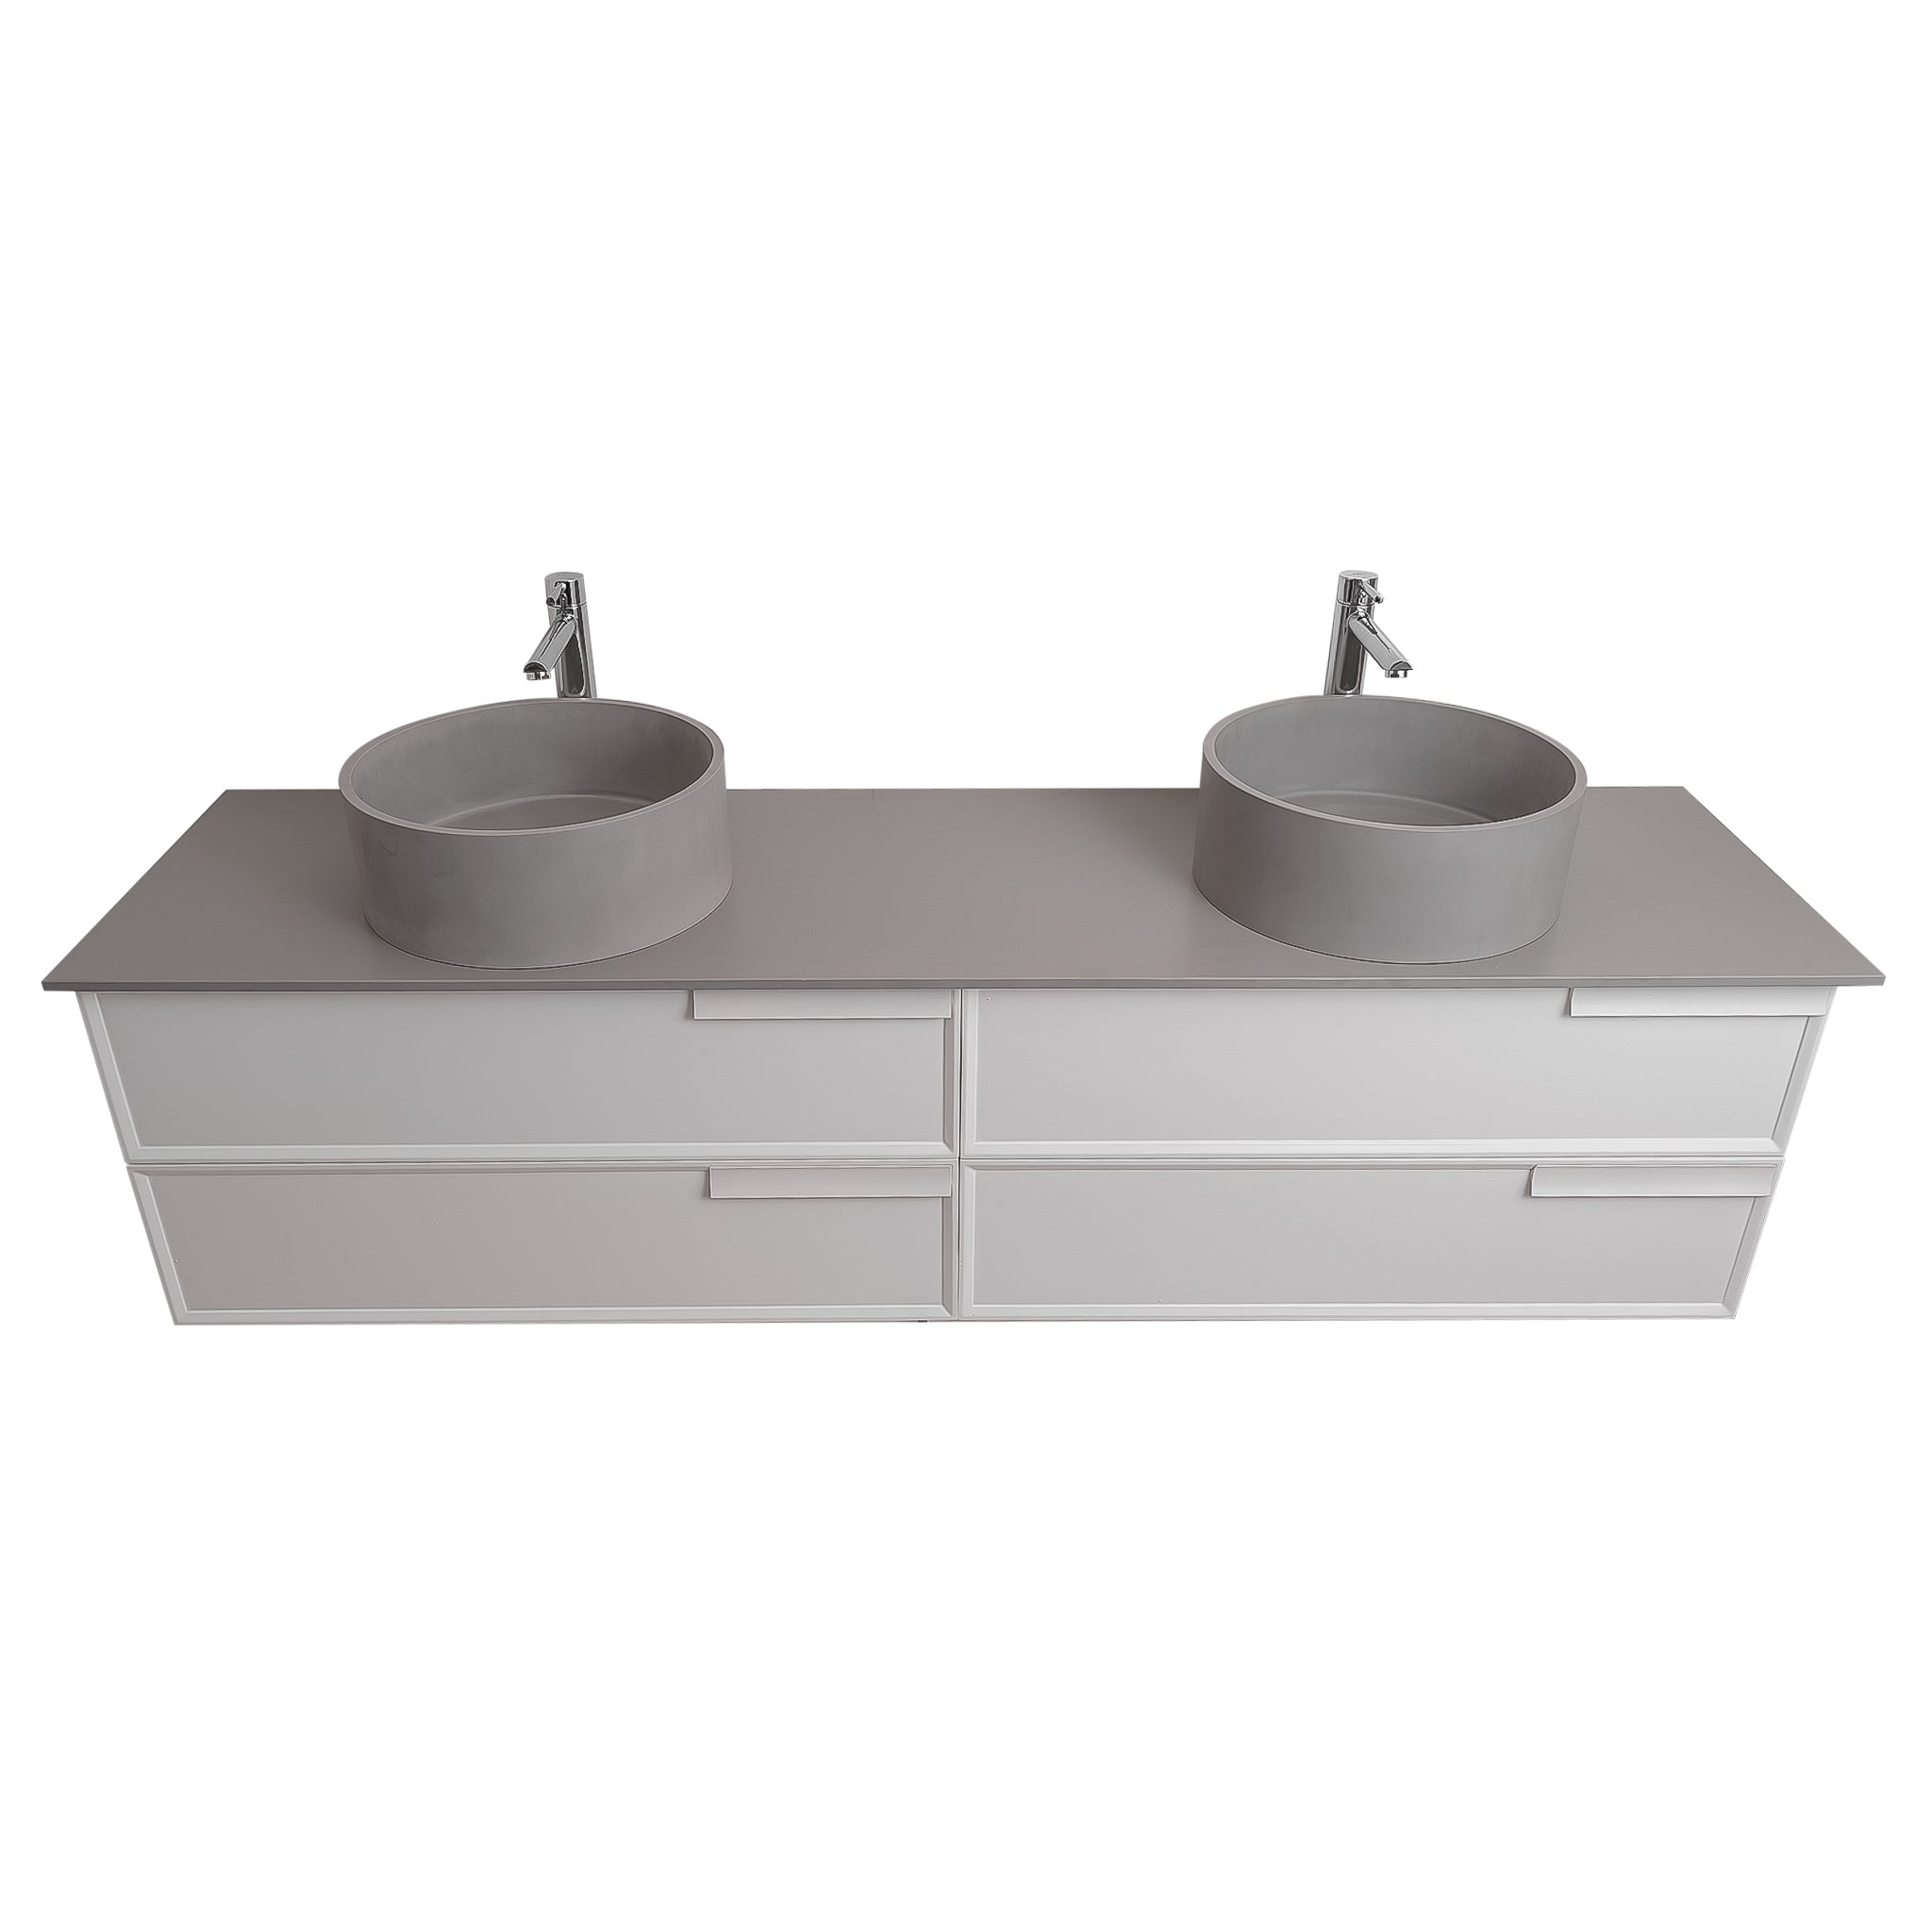 Garda 63 Matte White Cabinet, Solid Surface Flat Grey Counter and Two Round Solid Surface Grey Basin 1386, Wall Mounted Modern Vanity Set